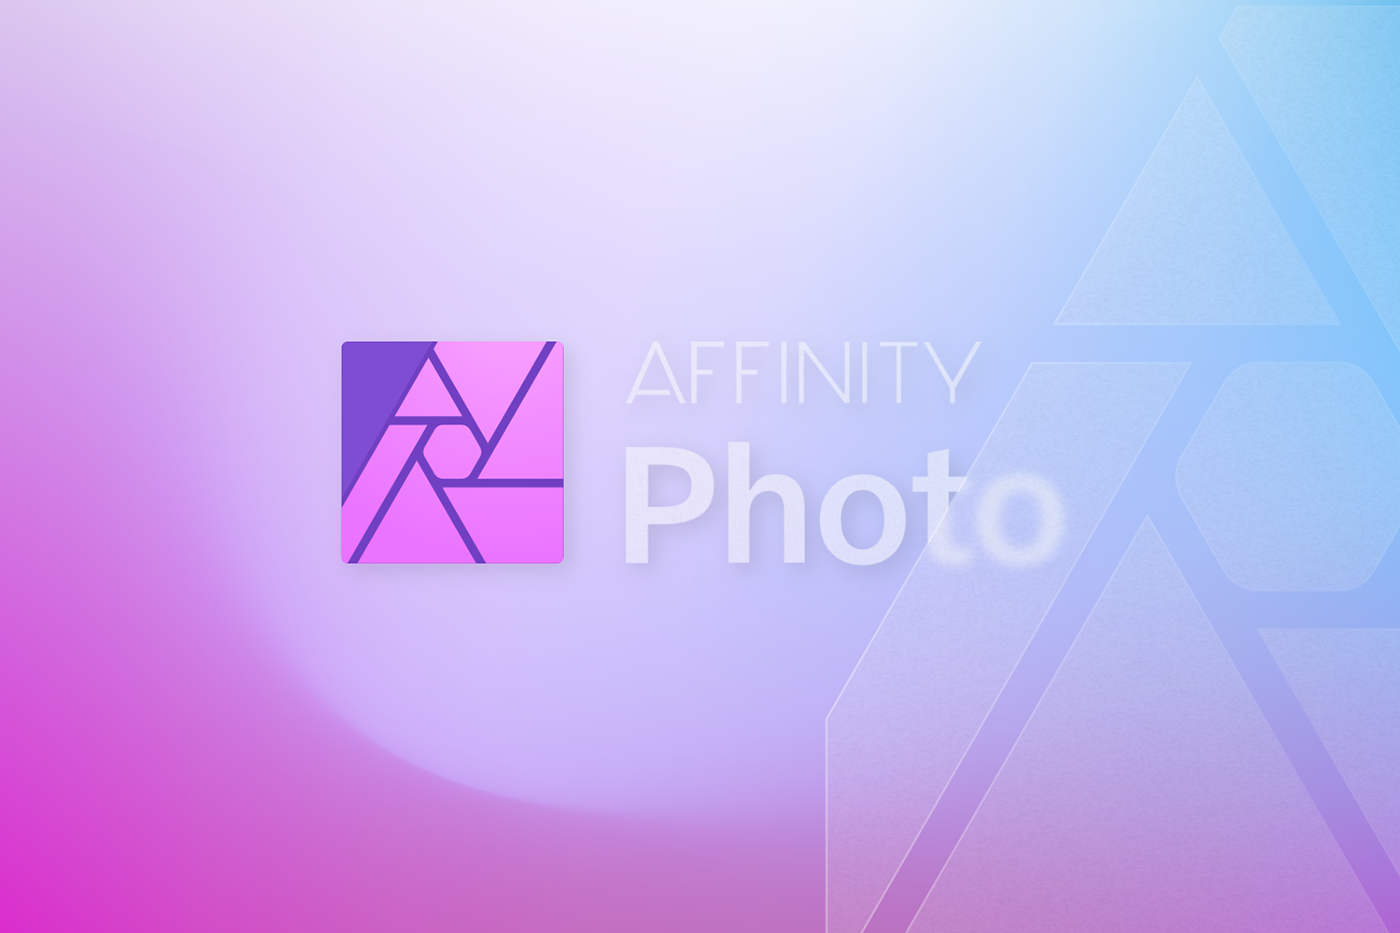 Affinity frosted glass Glass Morphism tutorial